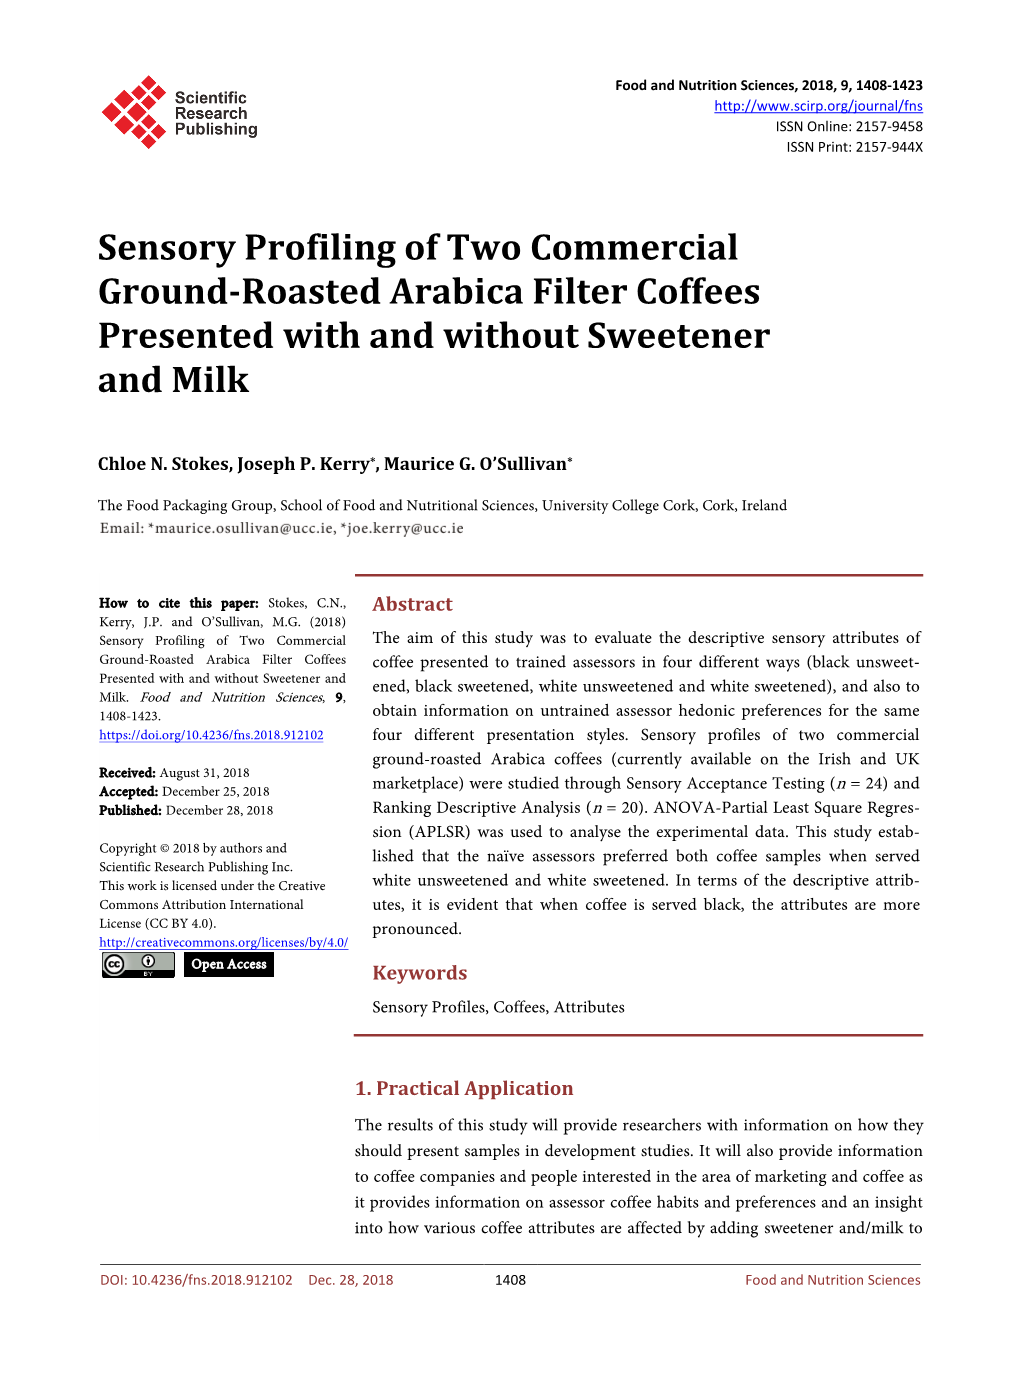 Sensory Profiling of Two Commercial Ground-Roasted Arabica Filter Coffees Presented with and Without Sweetener and Milk